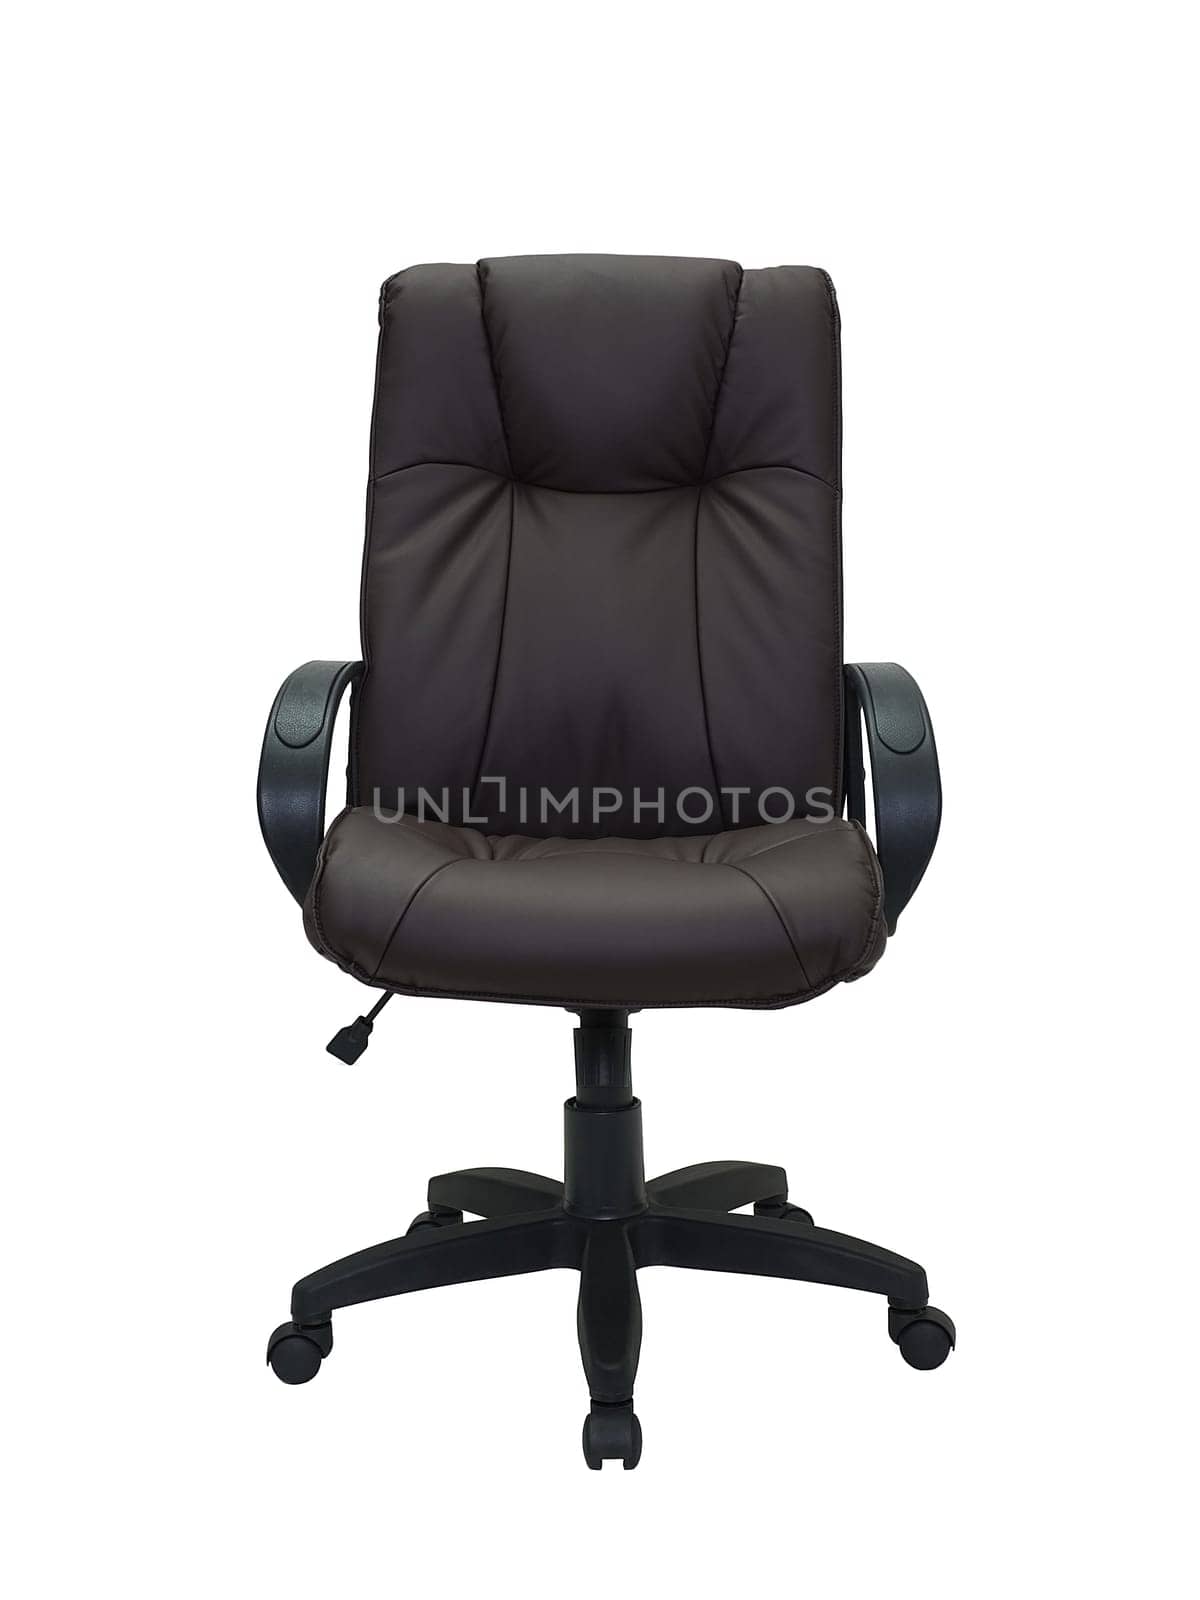 brown office armchair on wheels isolated on white background, front view. furniture in minimal style